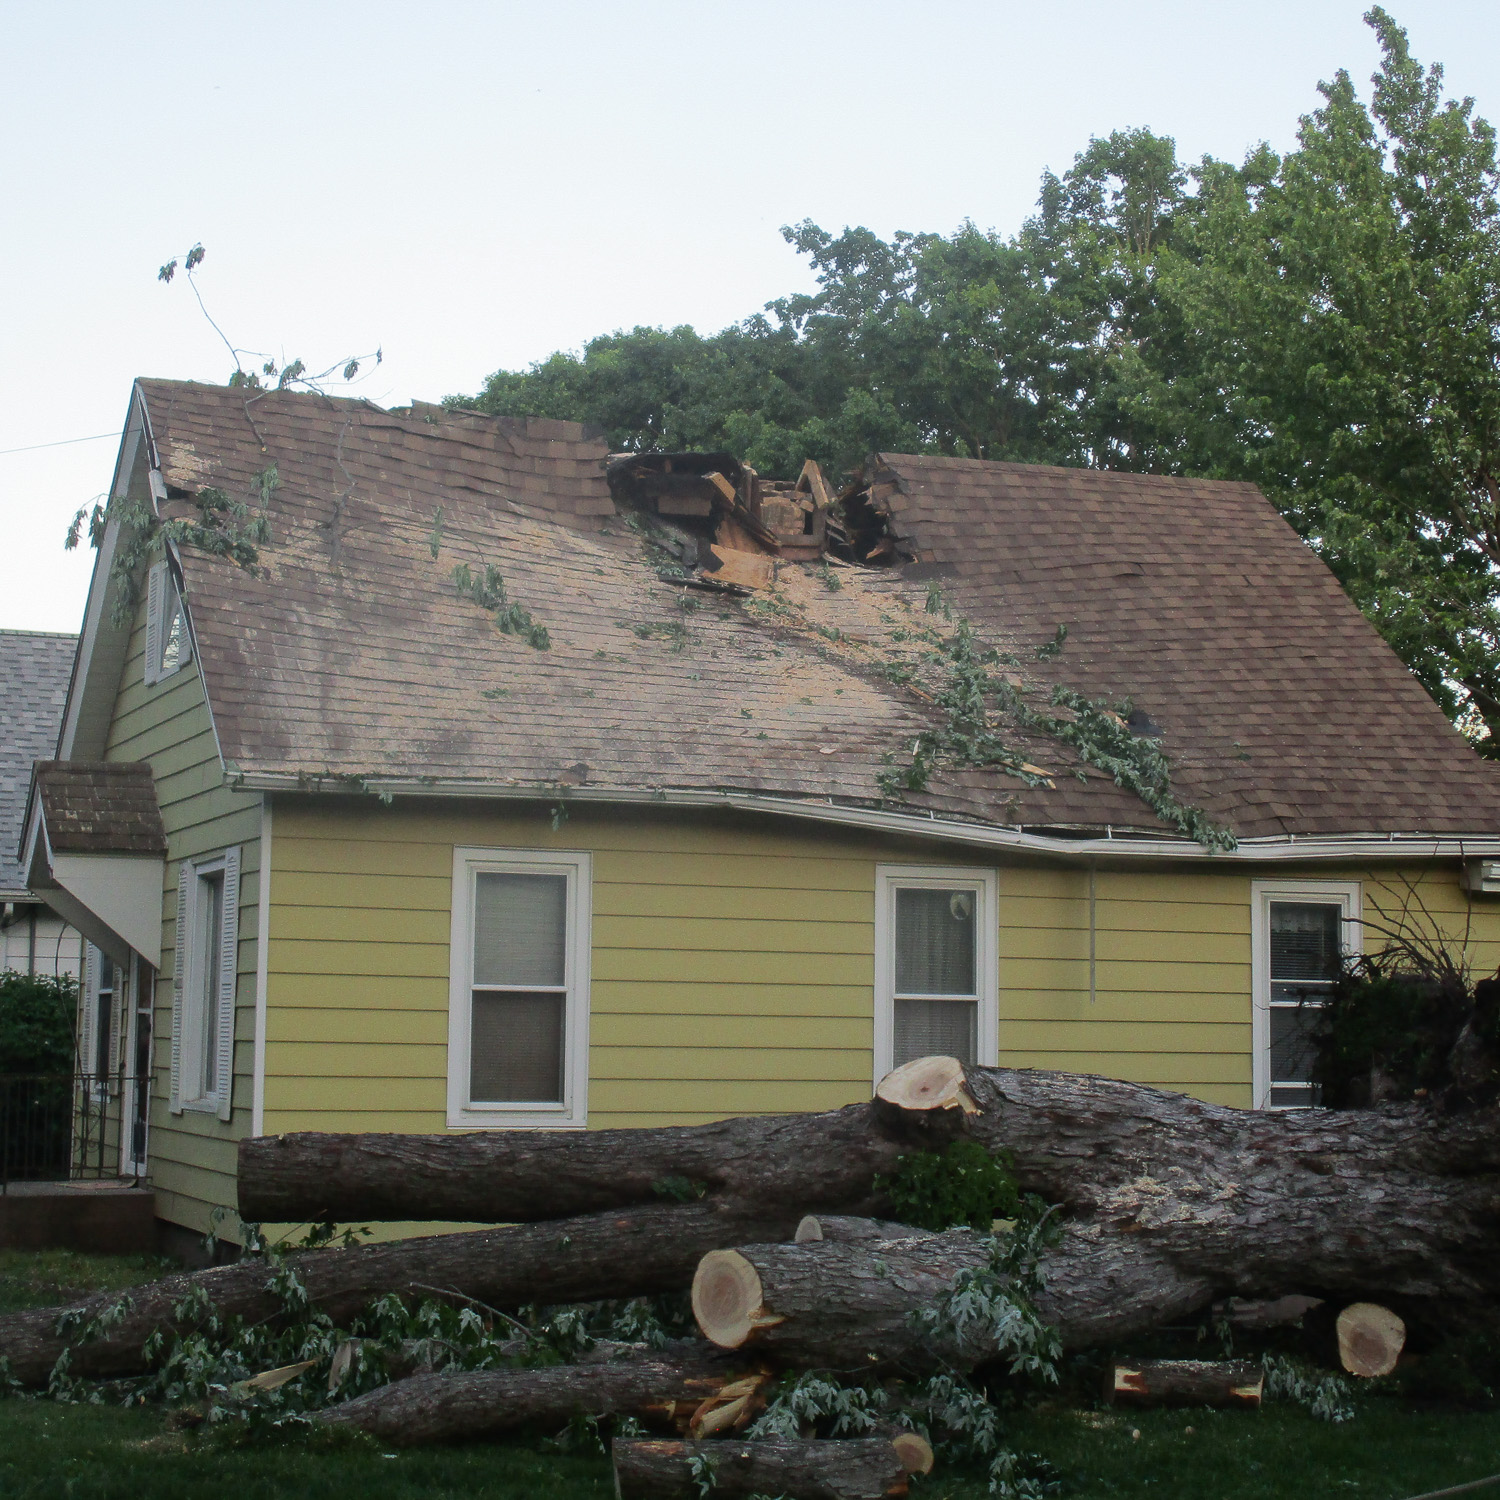 roof damage from fallen tree-large hole in roof from tree impact.